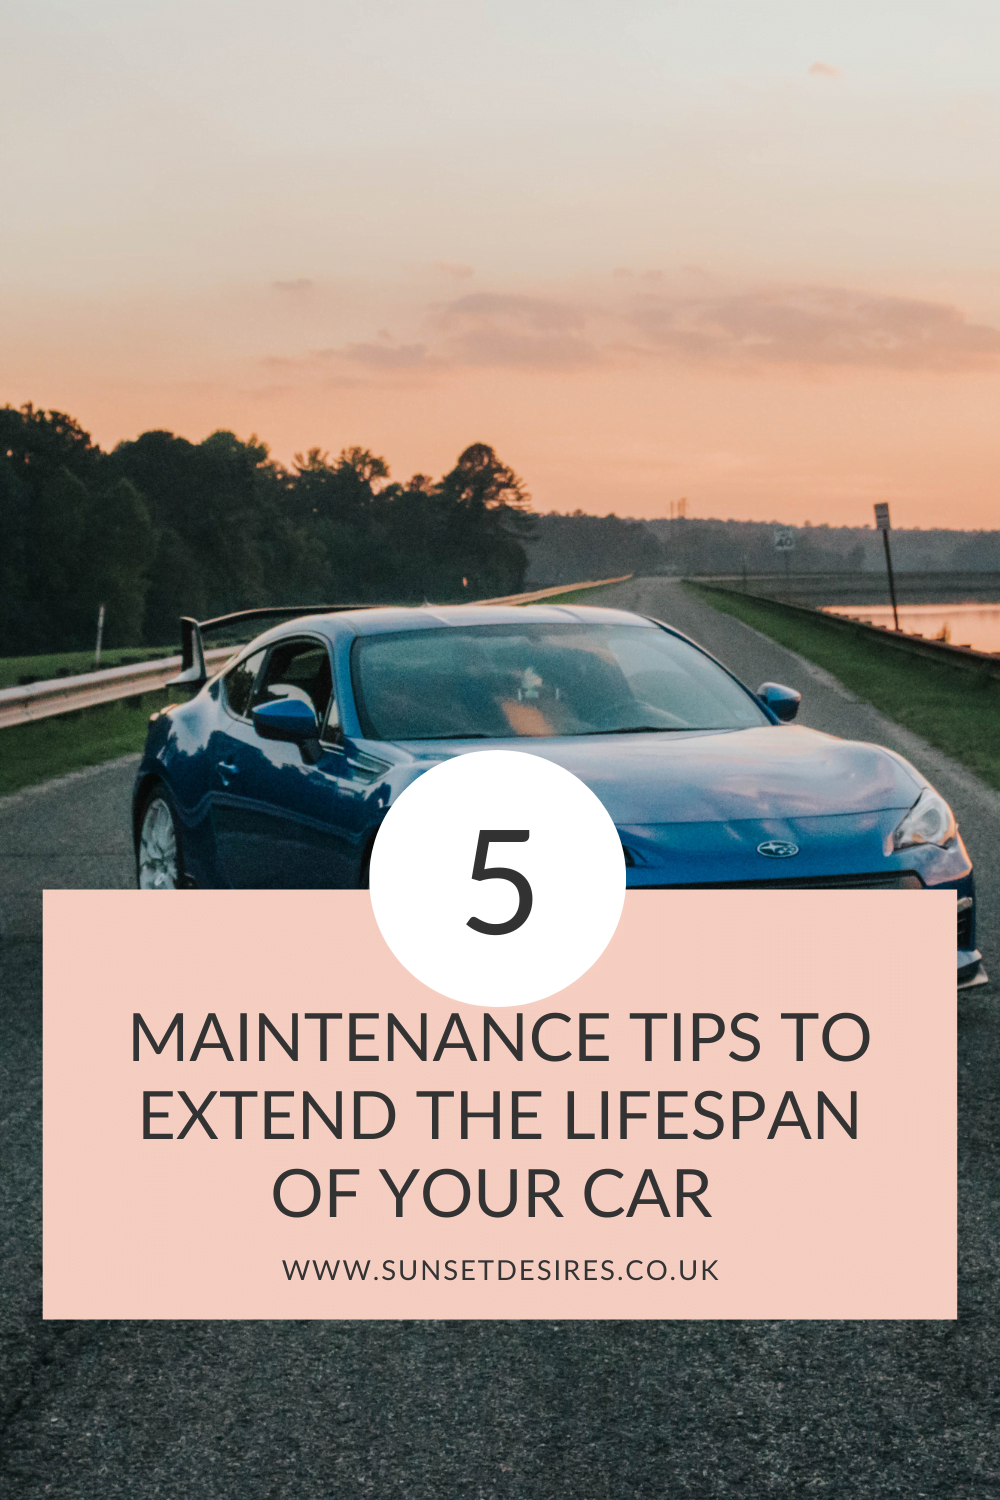 Top Tips for Extending the Lifespan of Your Car